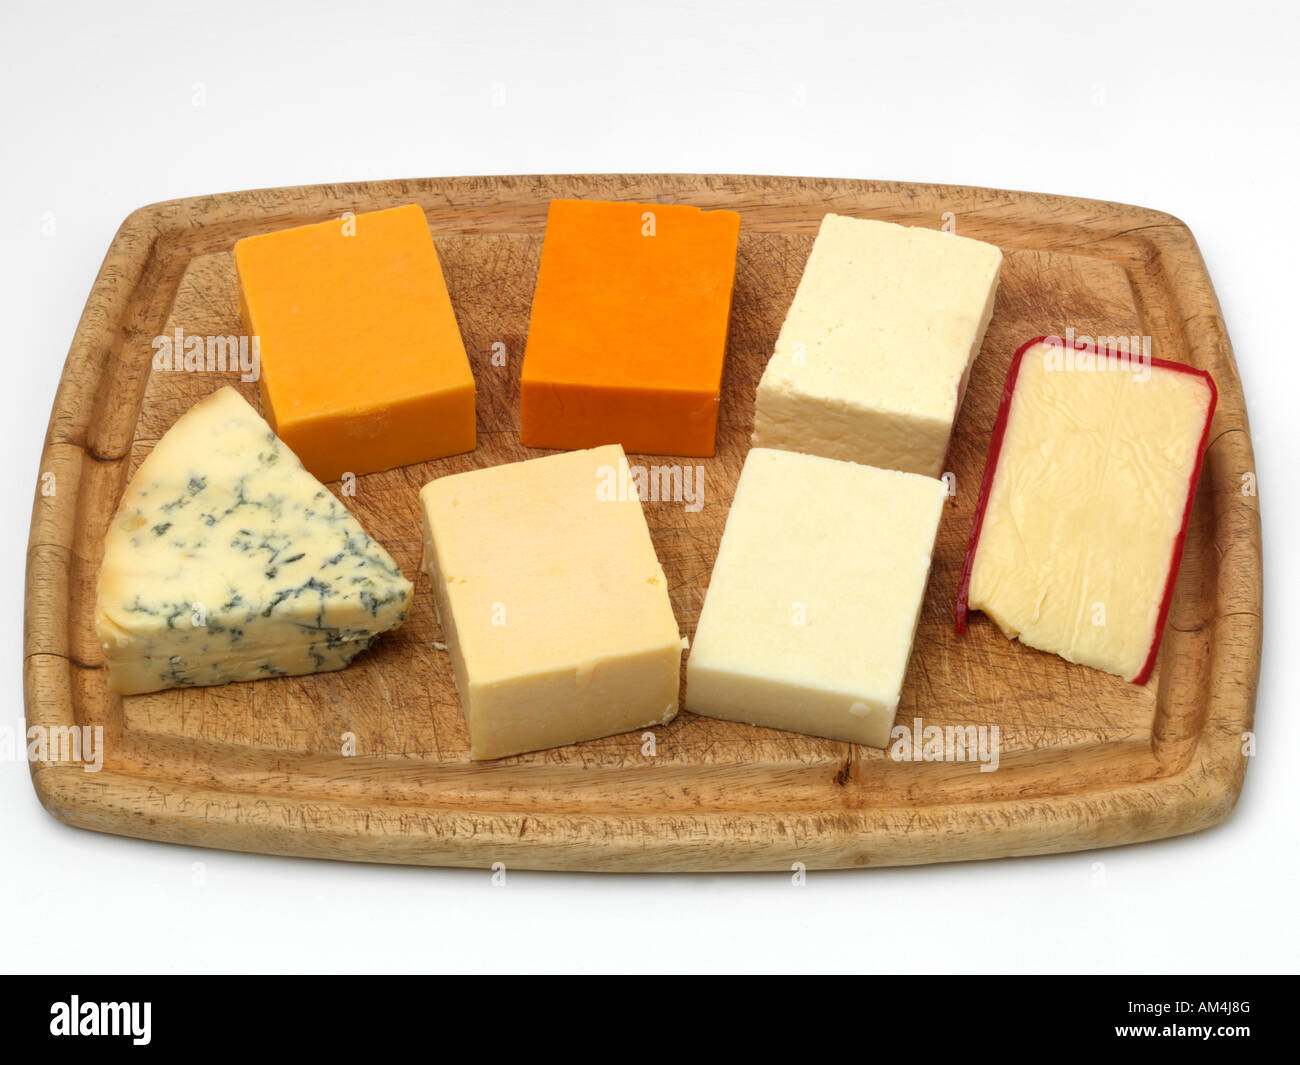 English Cheeses Double Gloucester Red Leicester Cheshire Stilton Cheddar  Lancashire and Wensleydale Stock Photo - Alamy